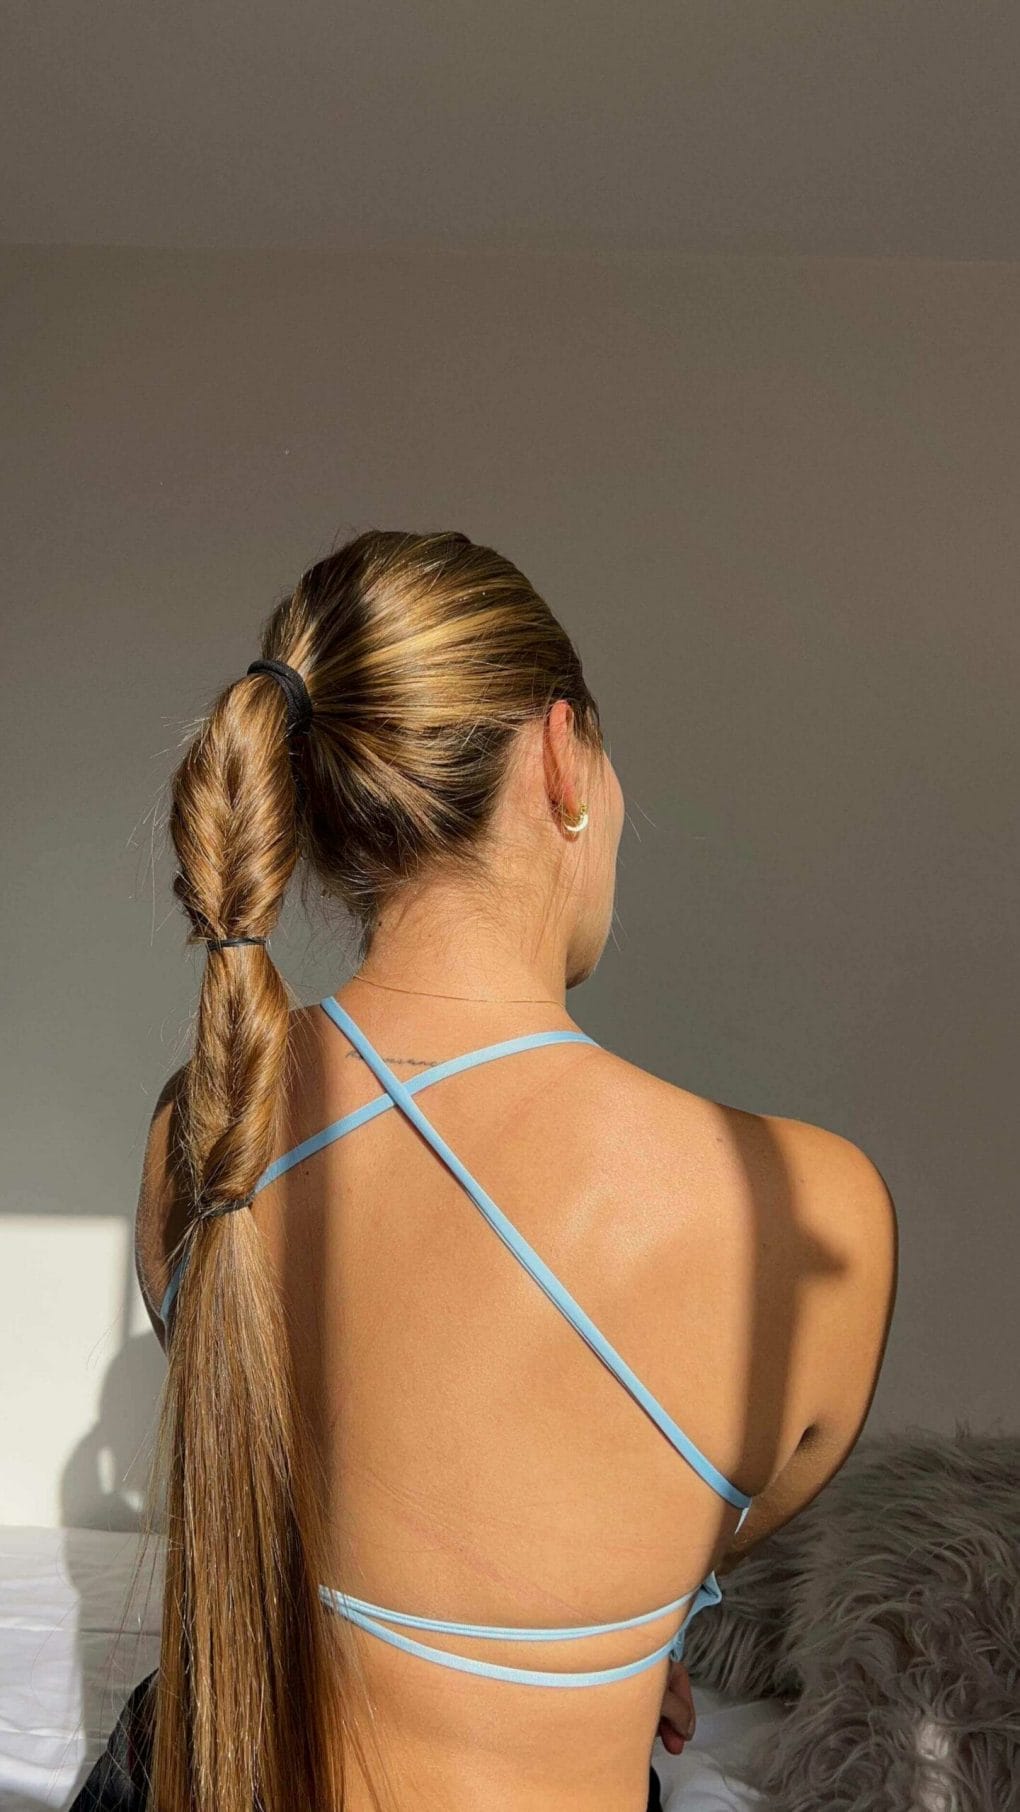 High ponytail transitioning into a honey-blonde twisted braid suitable for softball